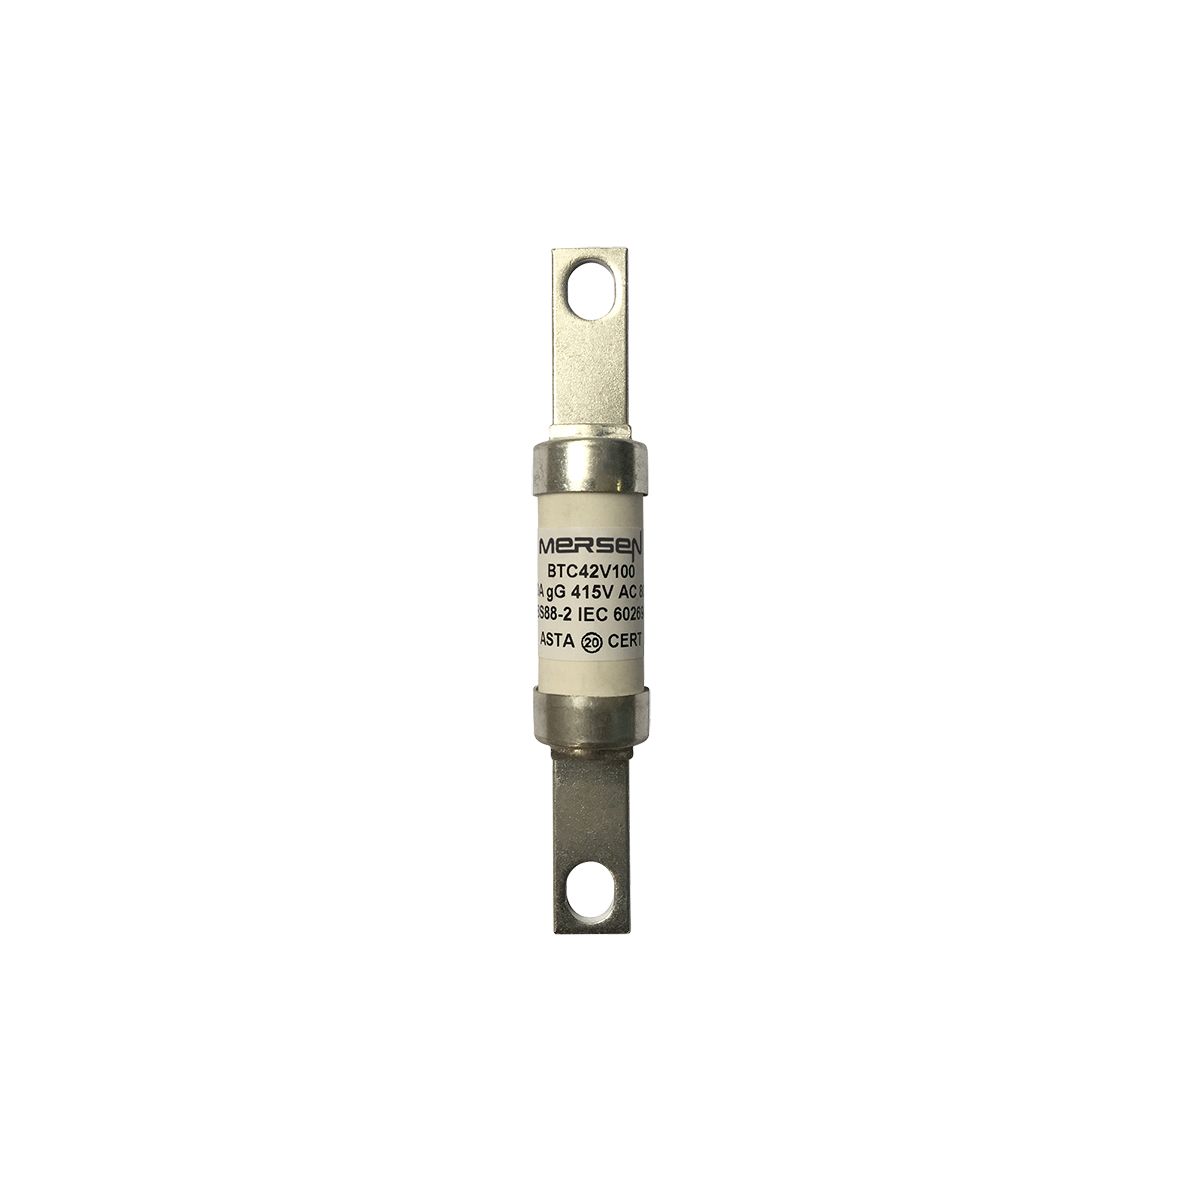 Z1045303 - Central Bolted Tag fuse-links gG 415VAC/240VDC 100A